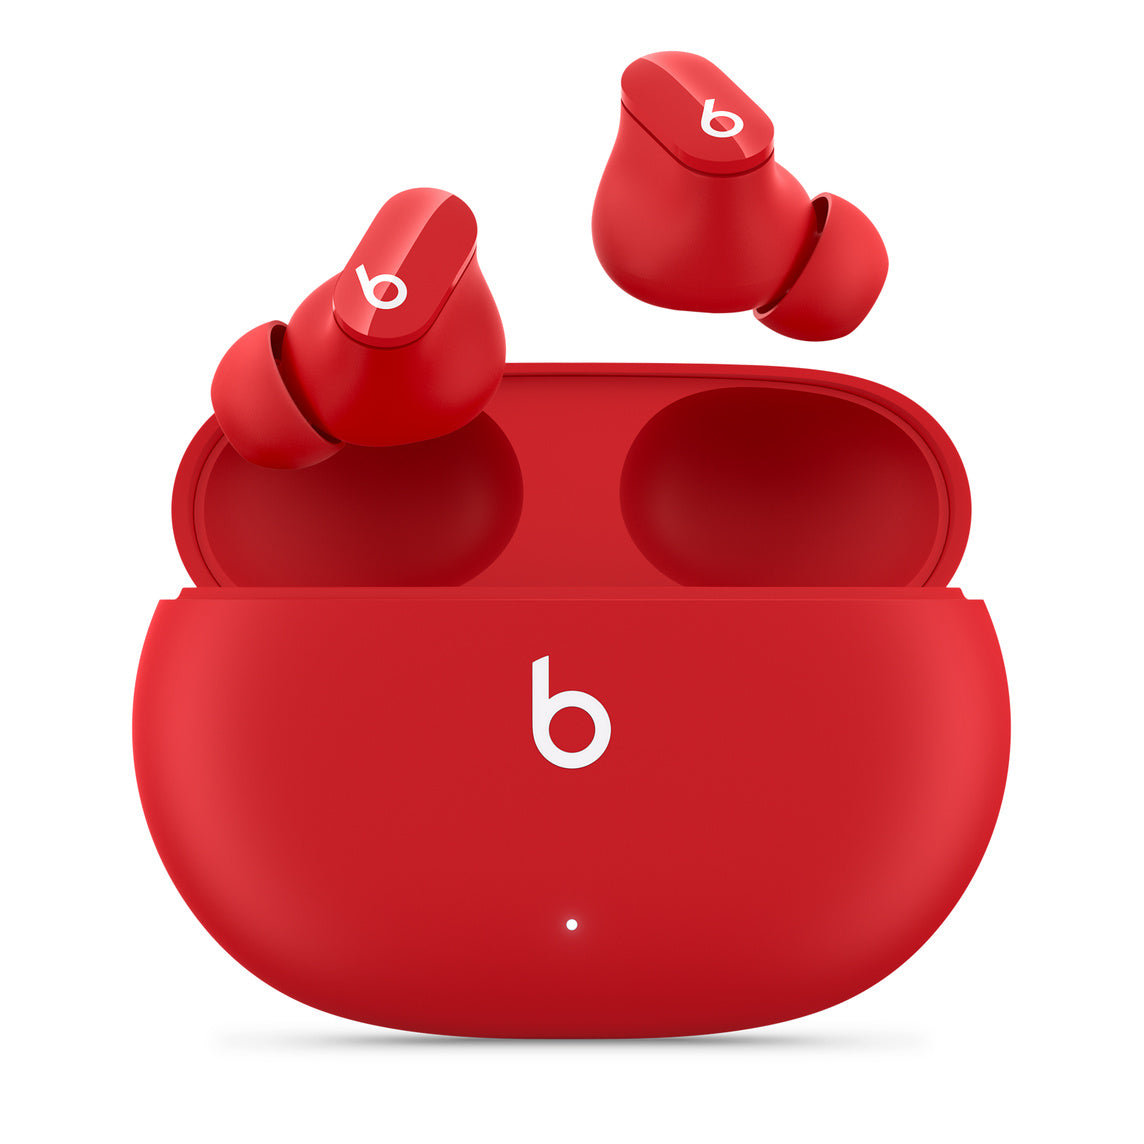 Beats Studio Buds - True Wireless Noise Cancelling Earbuds - Compatible with Apple & Android, Built-in Microphone, IPX4 Rating, Sweat Resistant Earphones, Class 1 Bluetooth Headphones - Red